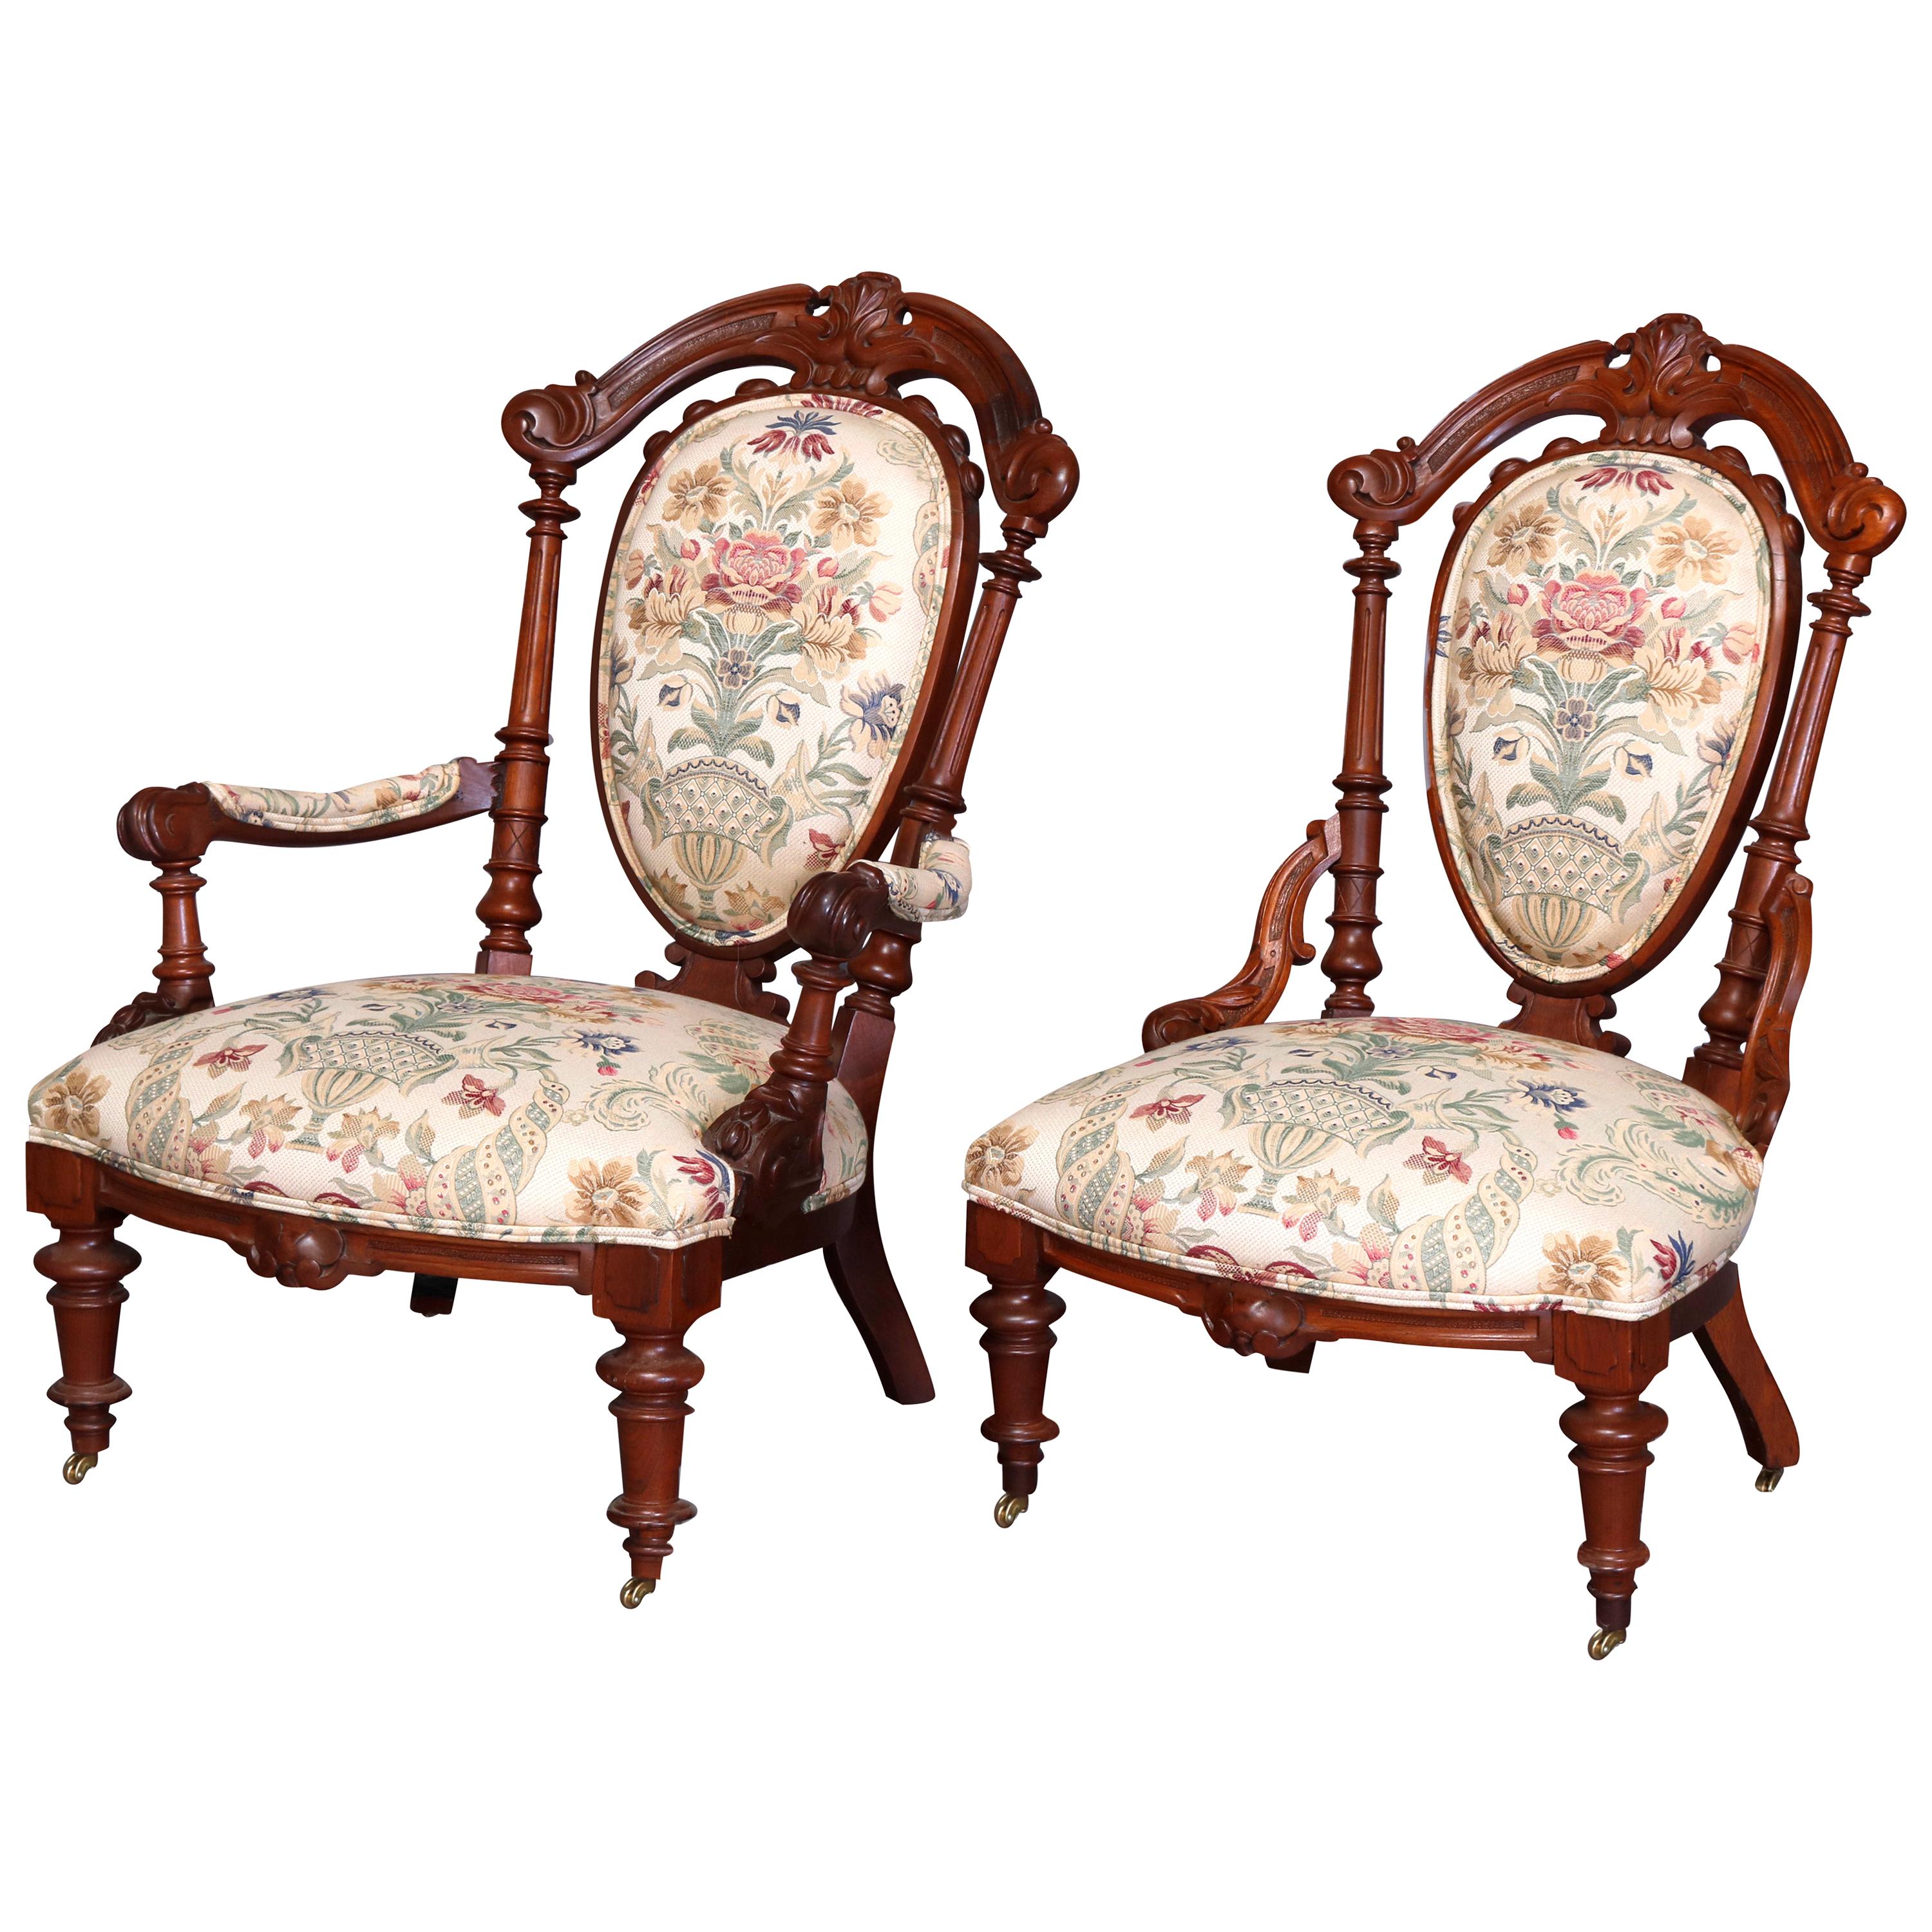 Two Antique French Victorian Renaissance Revival Carved Walnut Parlor Chairs